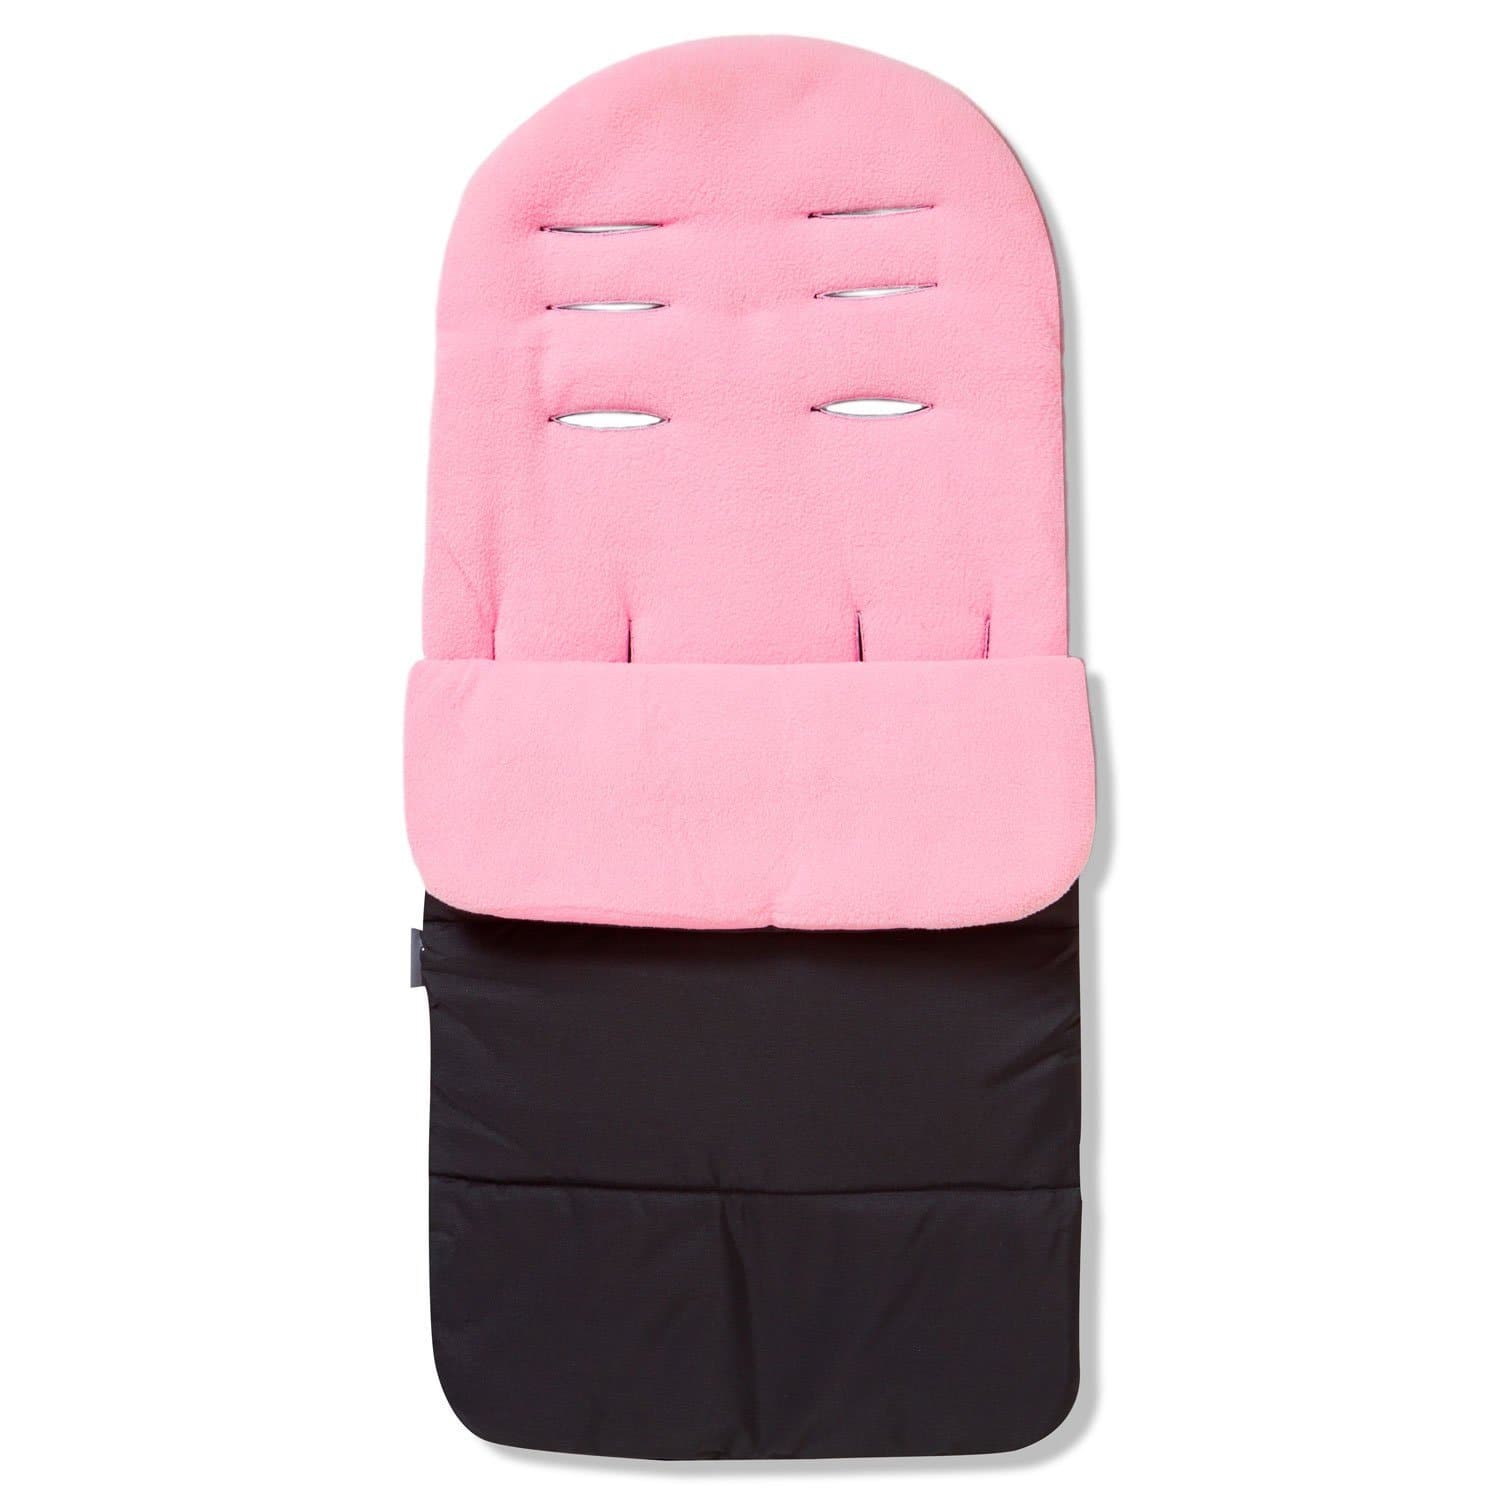 Premium Footmuff / Cosy Toes Compatible with Bebecar - Candy Pink / Fits All Models | For Your Little One